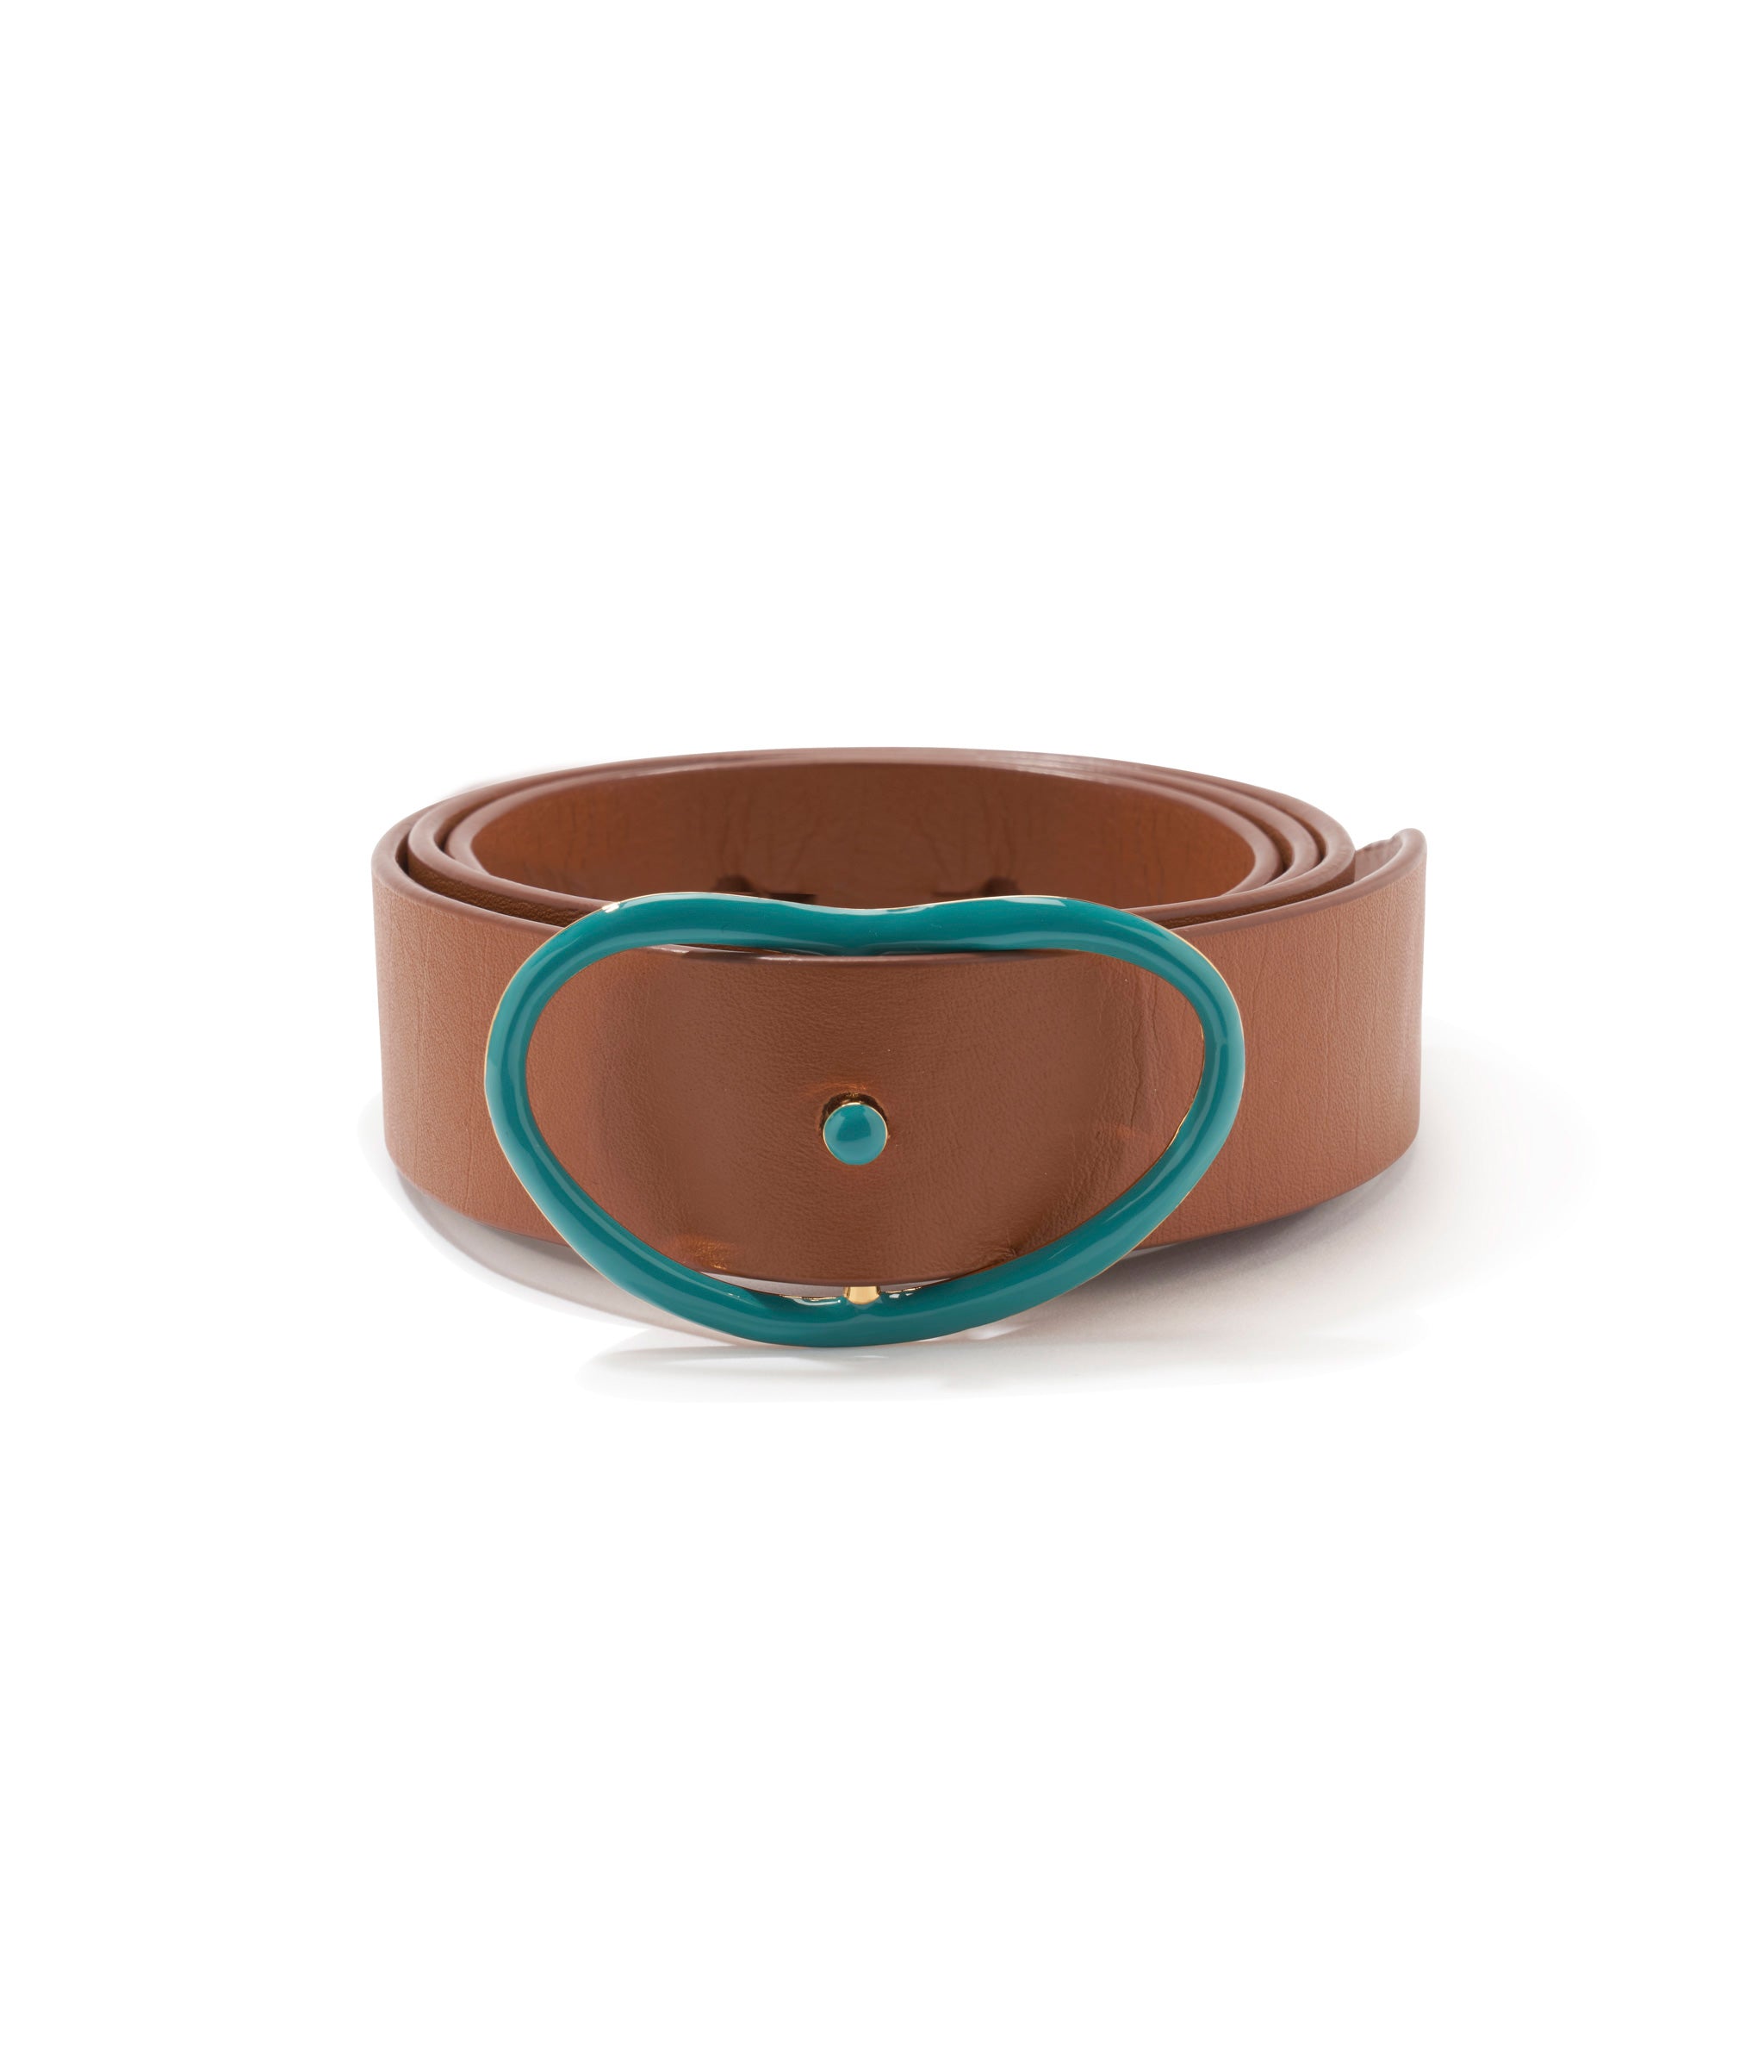 Wide Georgia Belt in Tan and Enameled Teal. Classic tan leather wide belt with teal-colored enamel buckle.